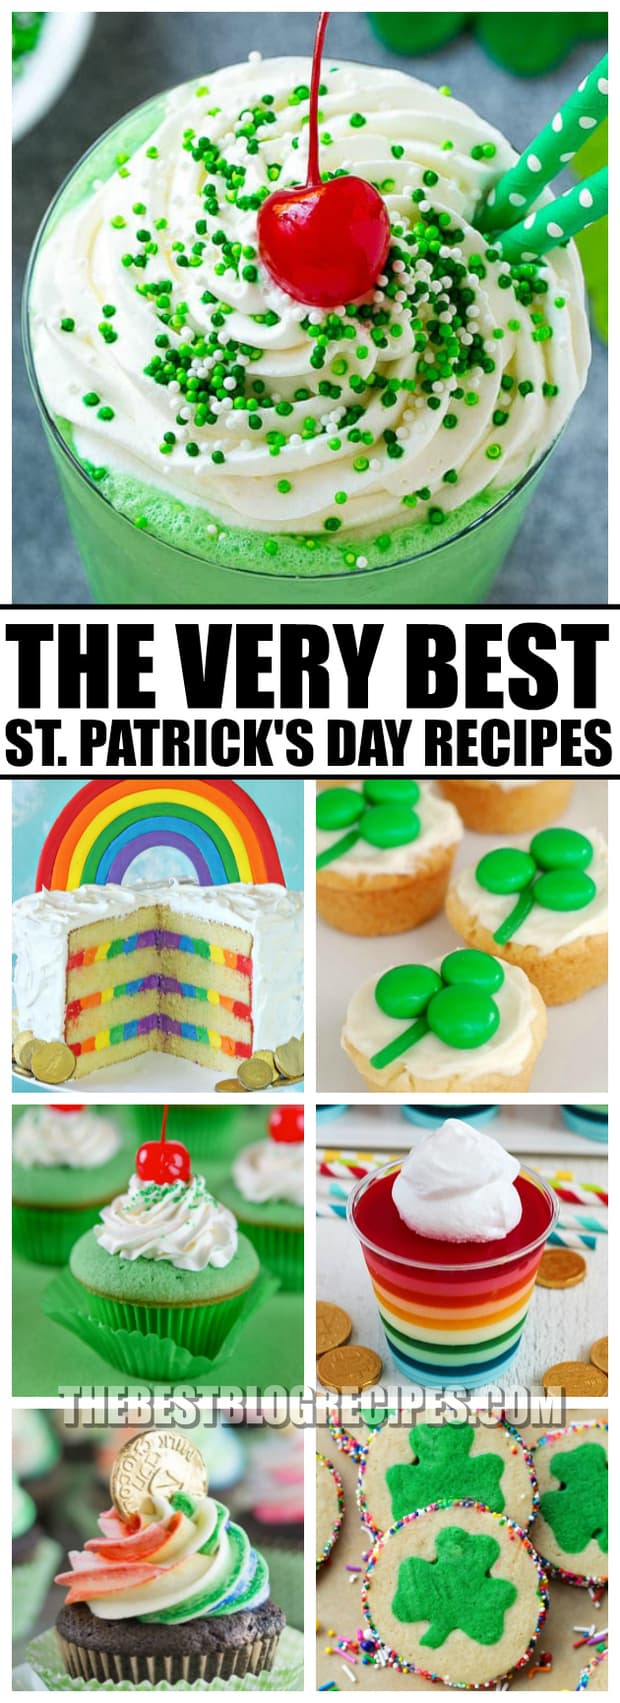 The Best St. Patrick's Day Recipes